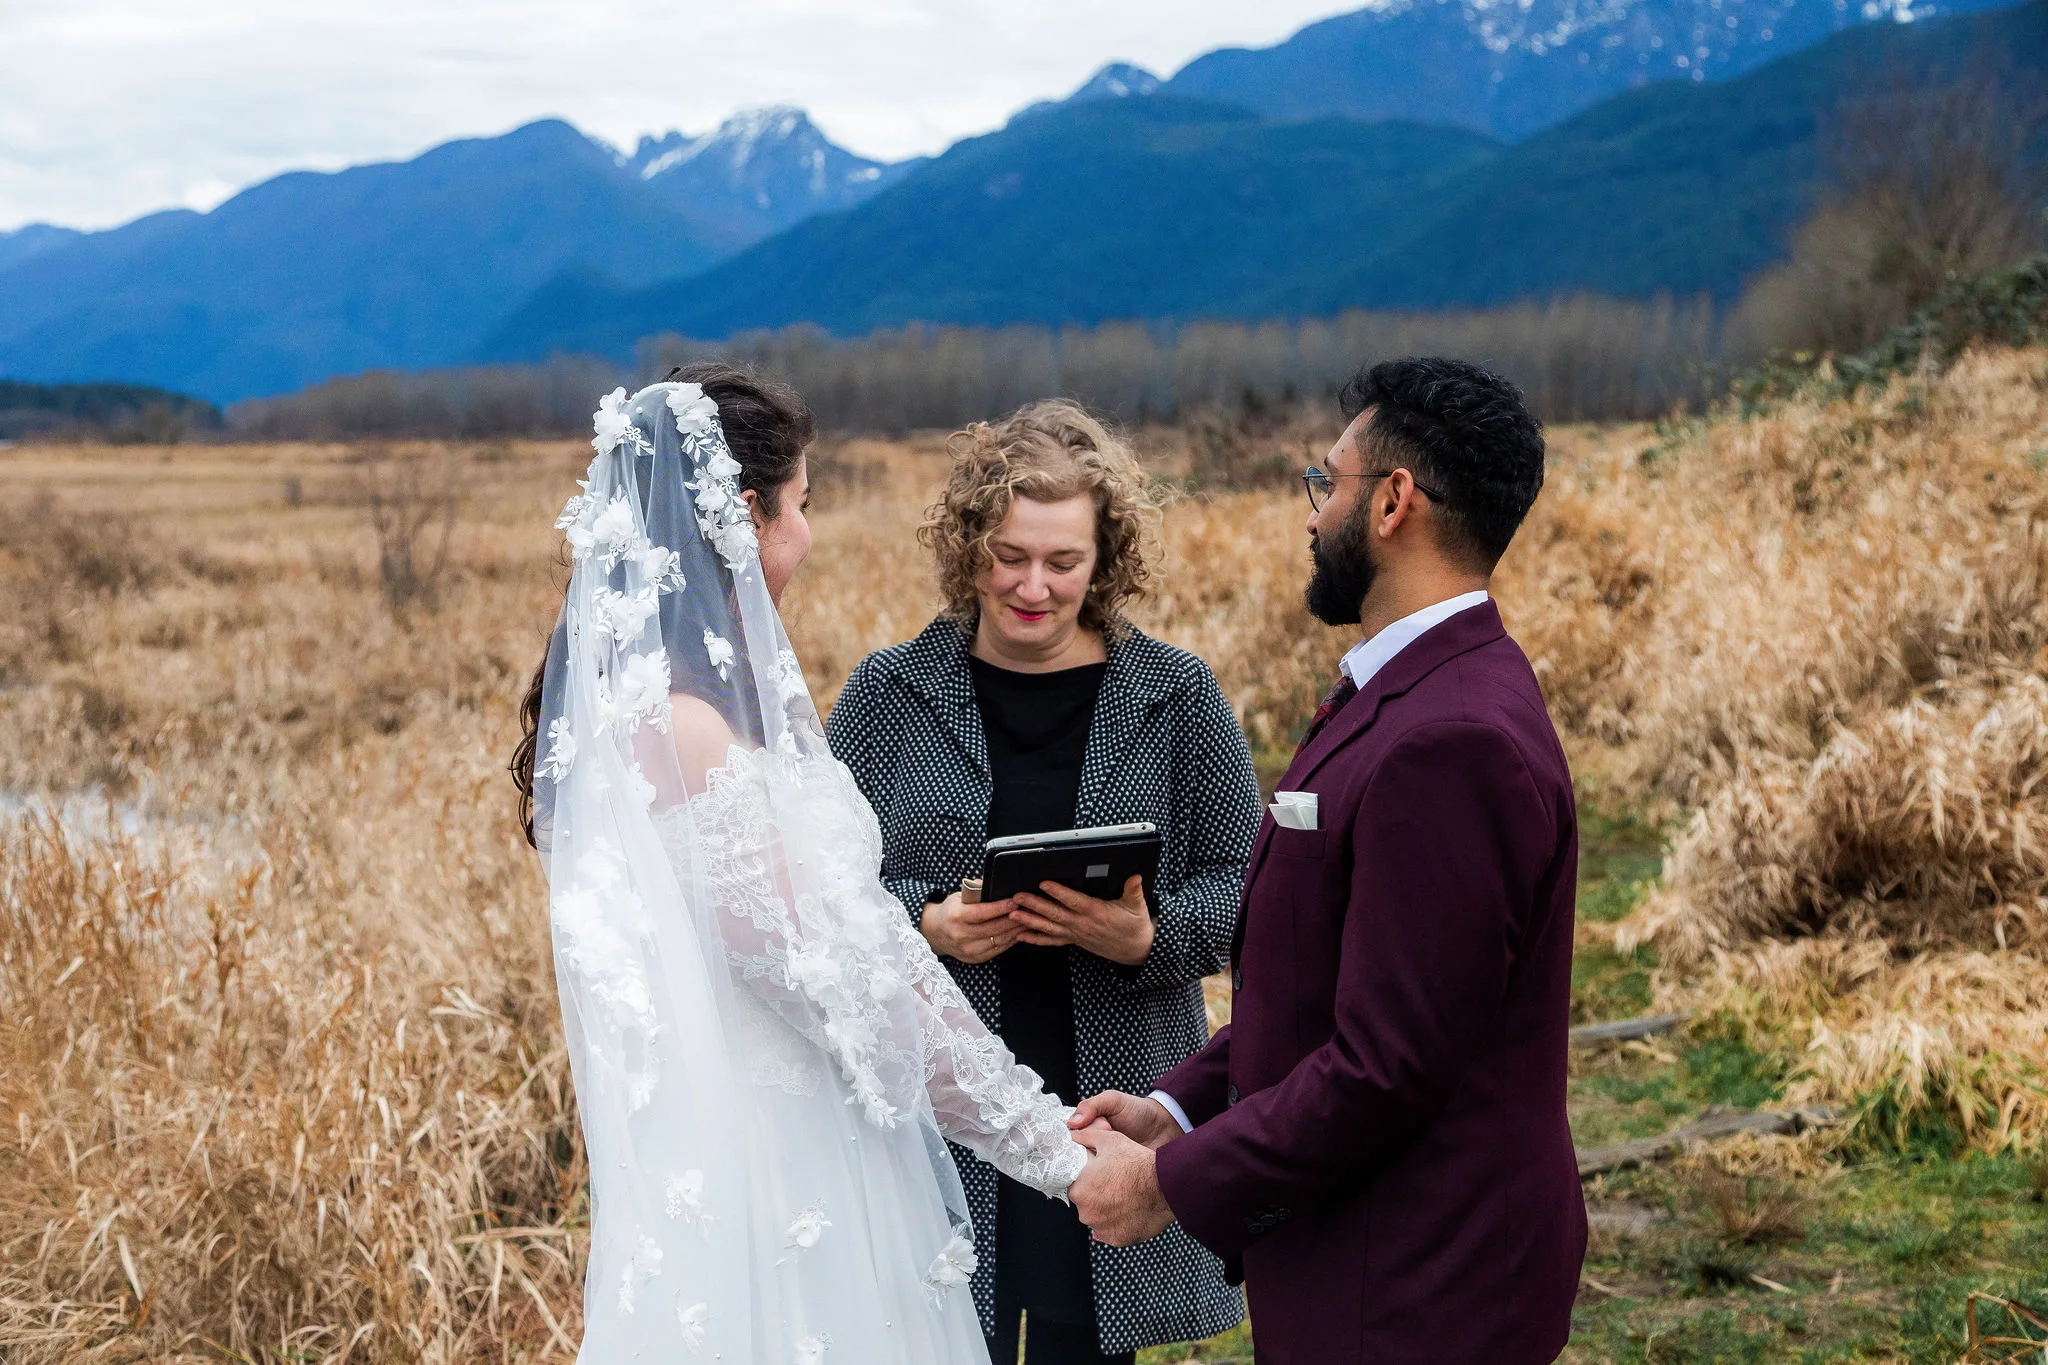 Officiant Shalom marrying Beth and Muneer at Pitt Lake